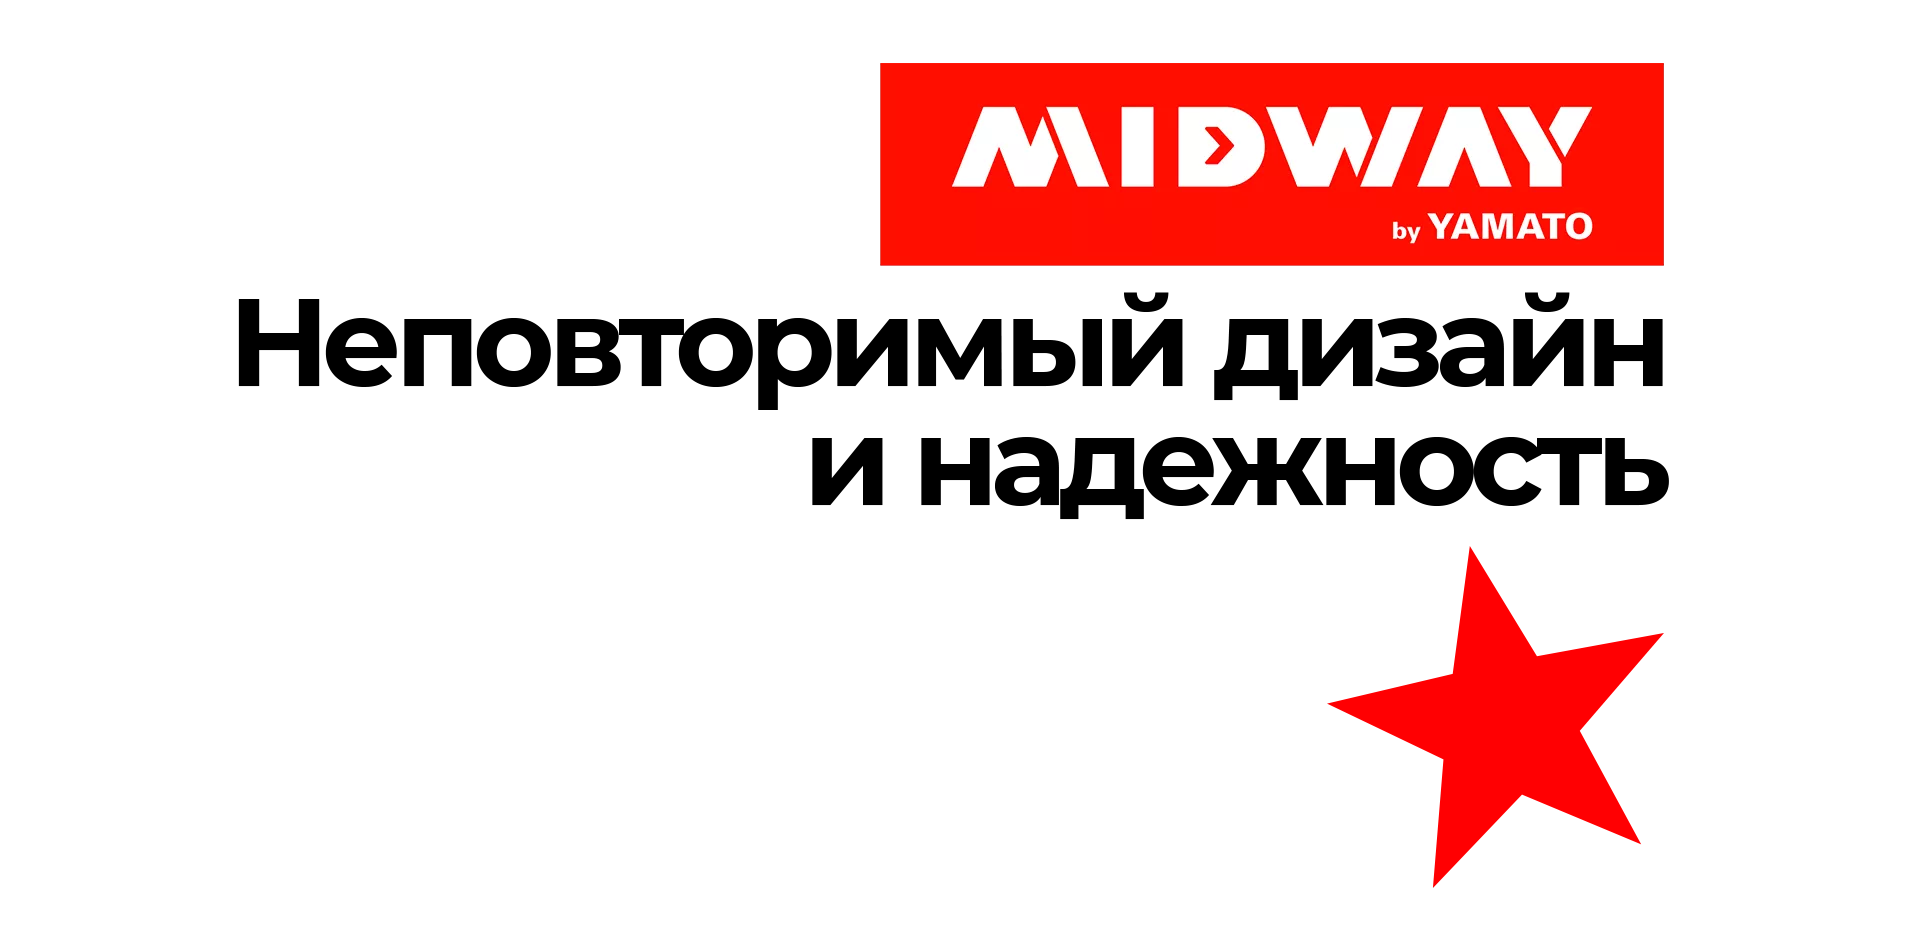  MIDWAY -   !